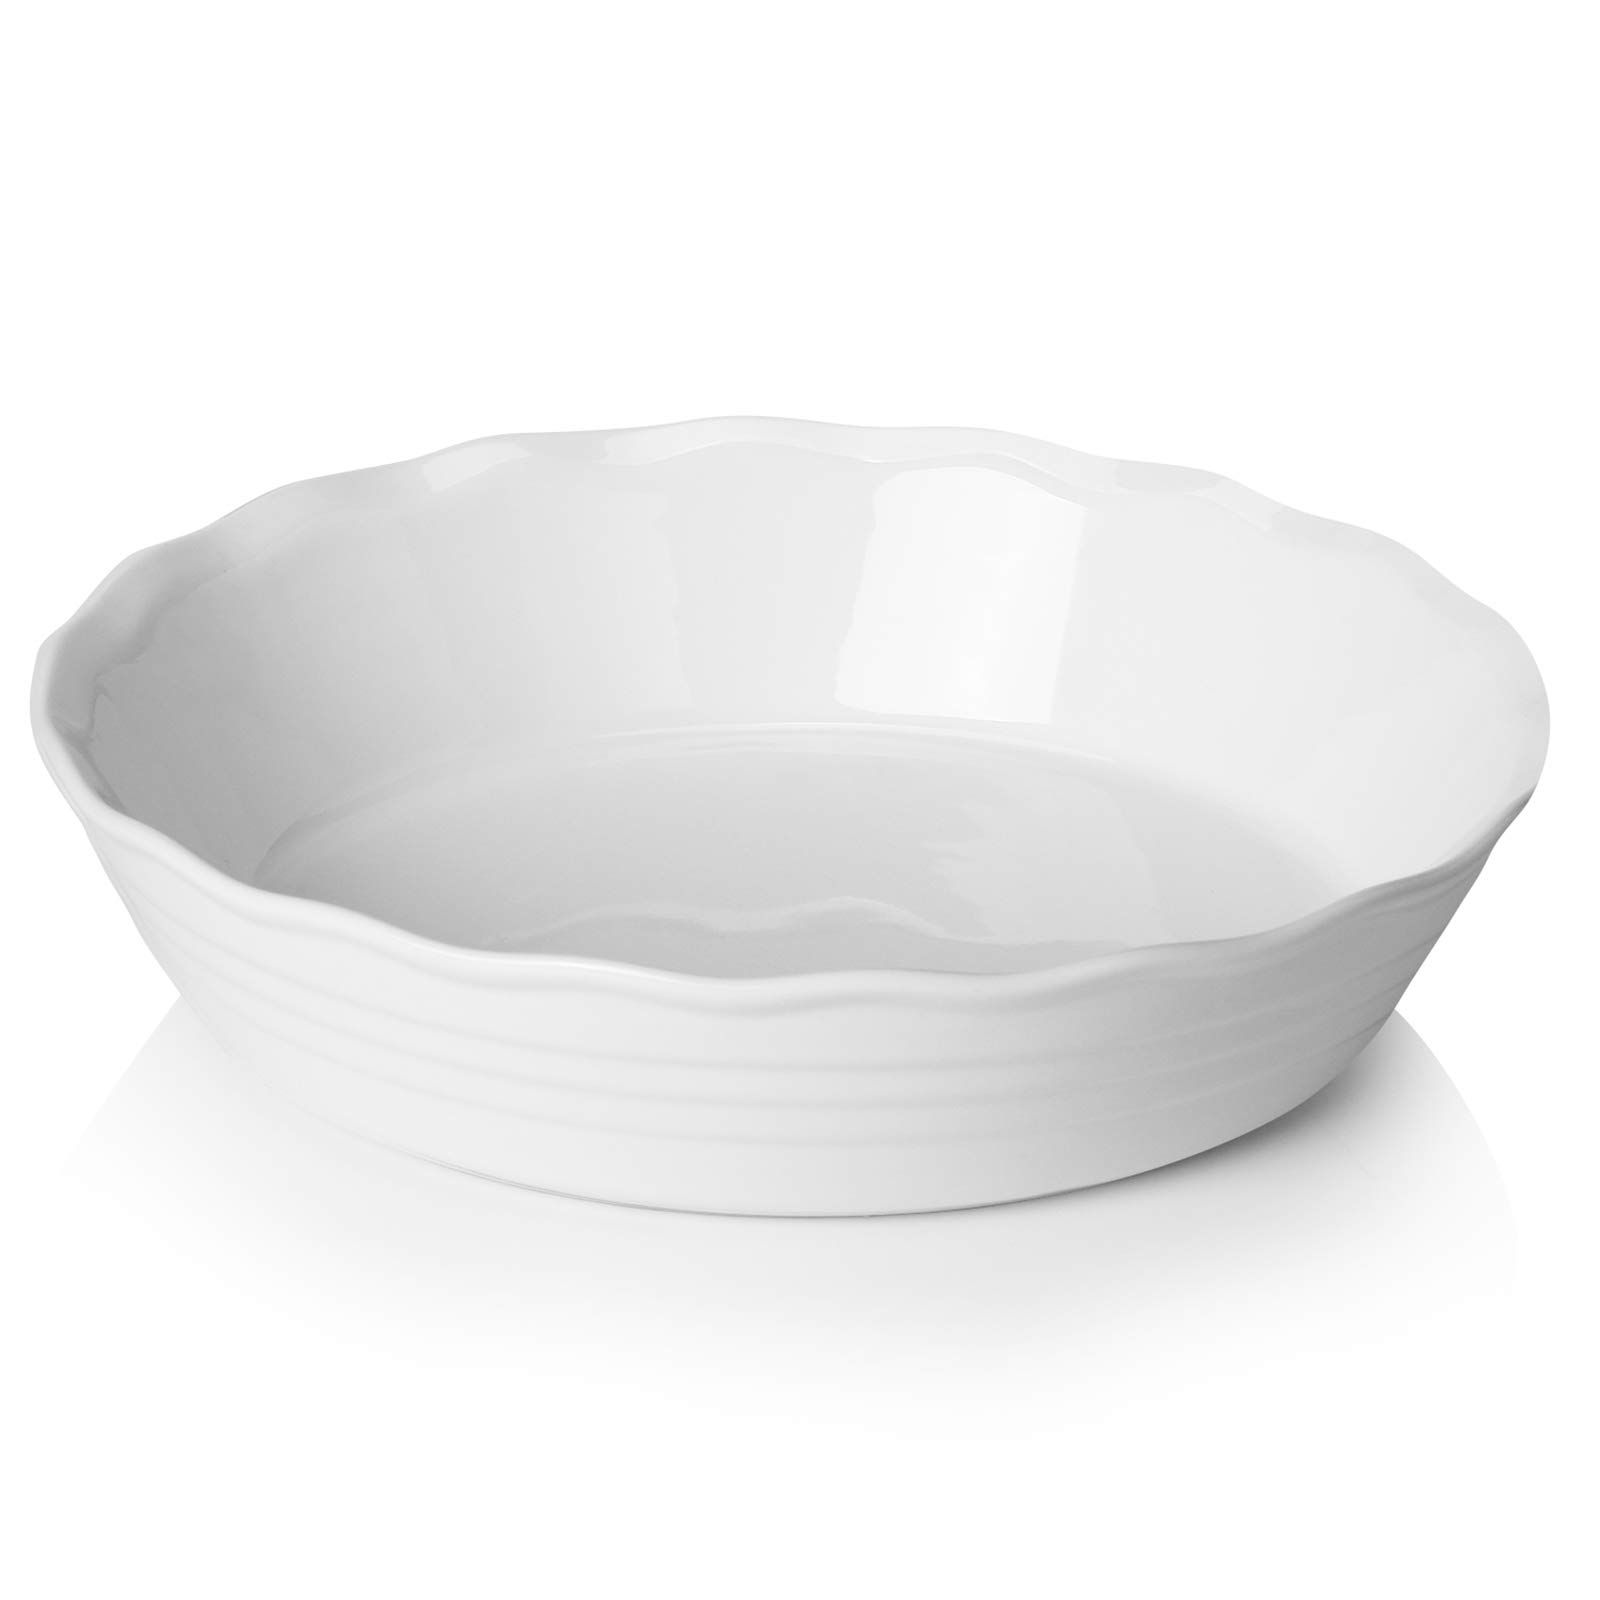 Sweese 516.101 Porcelain Pie Pan, 9 Inches Pie Plate, Round Baking Dish with Ruffled Edge, White | Amazon (US)